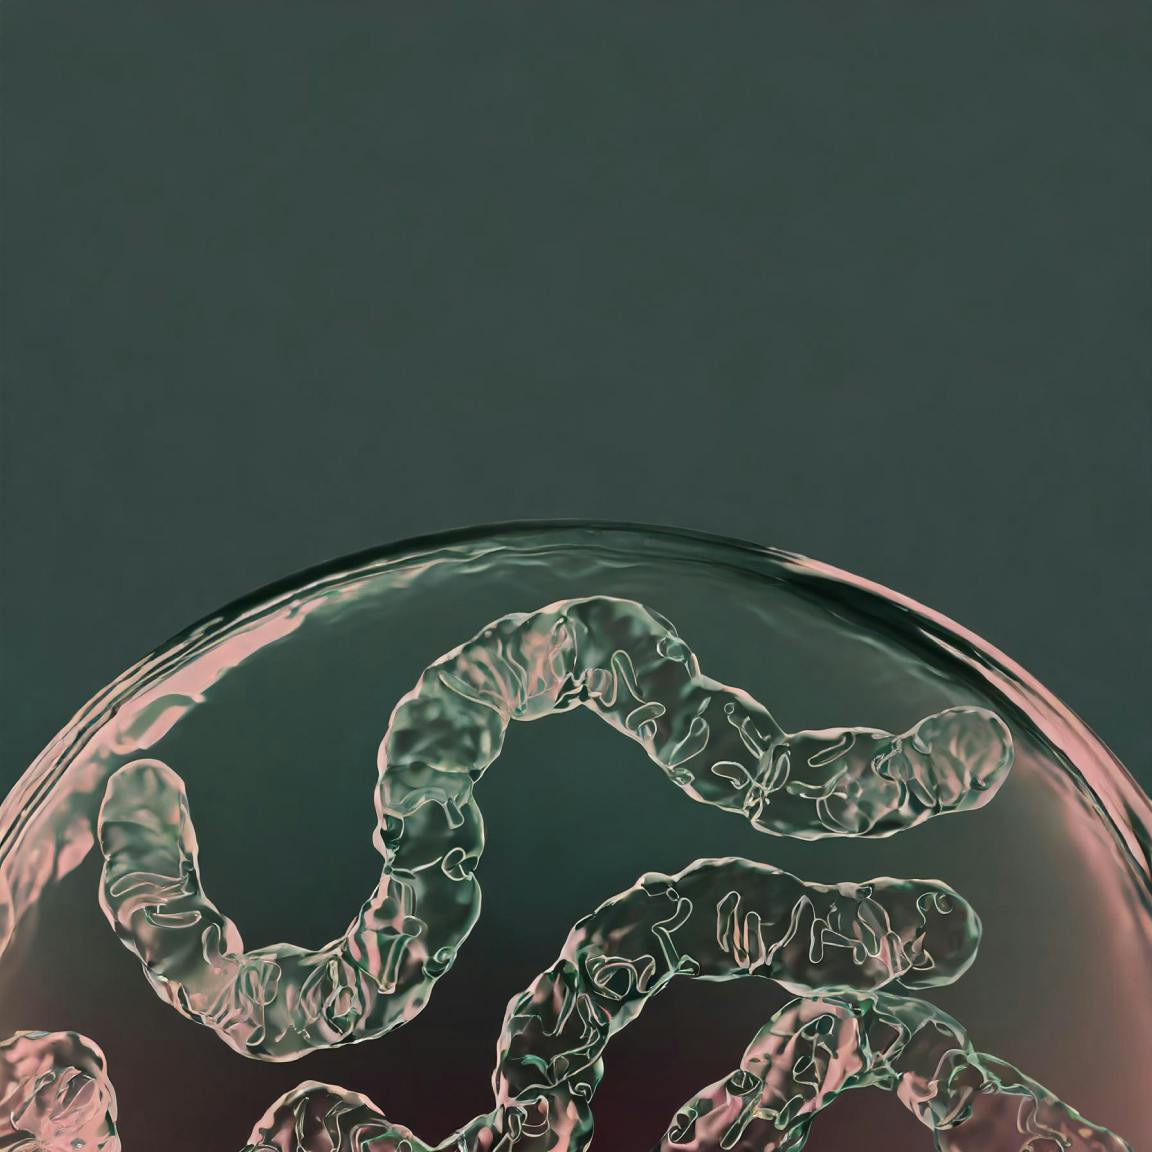 Digitally rendered realistic image of microscopic organism.